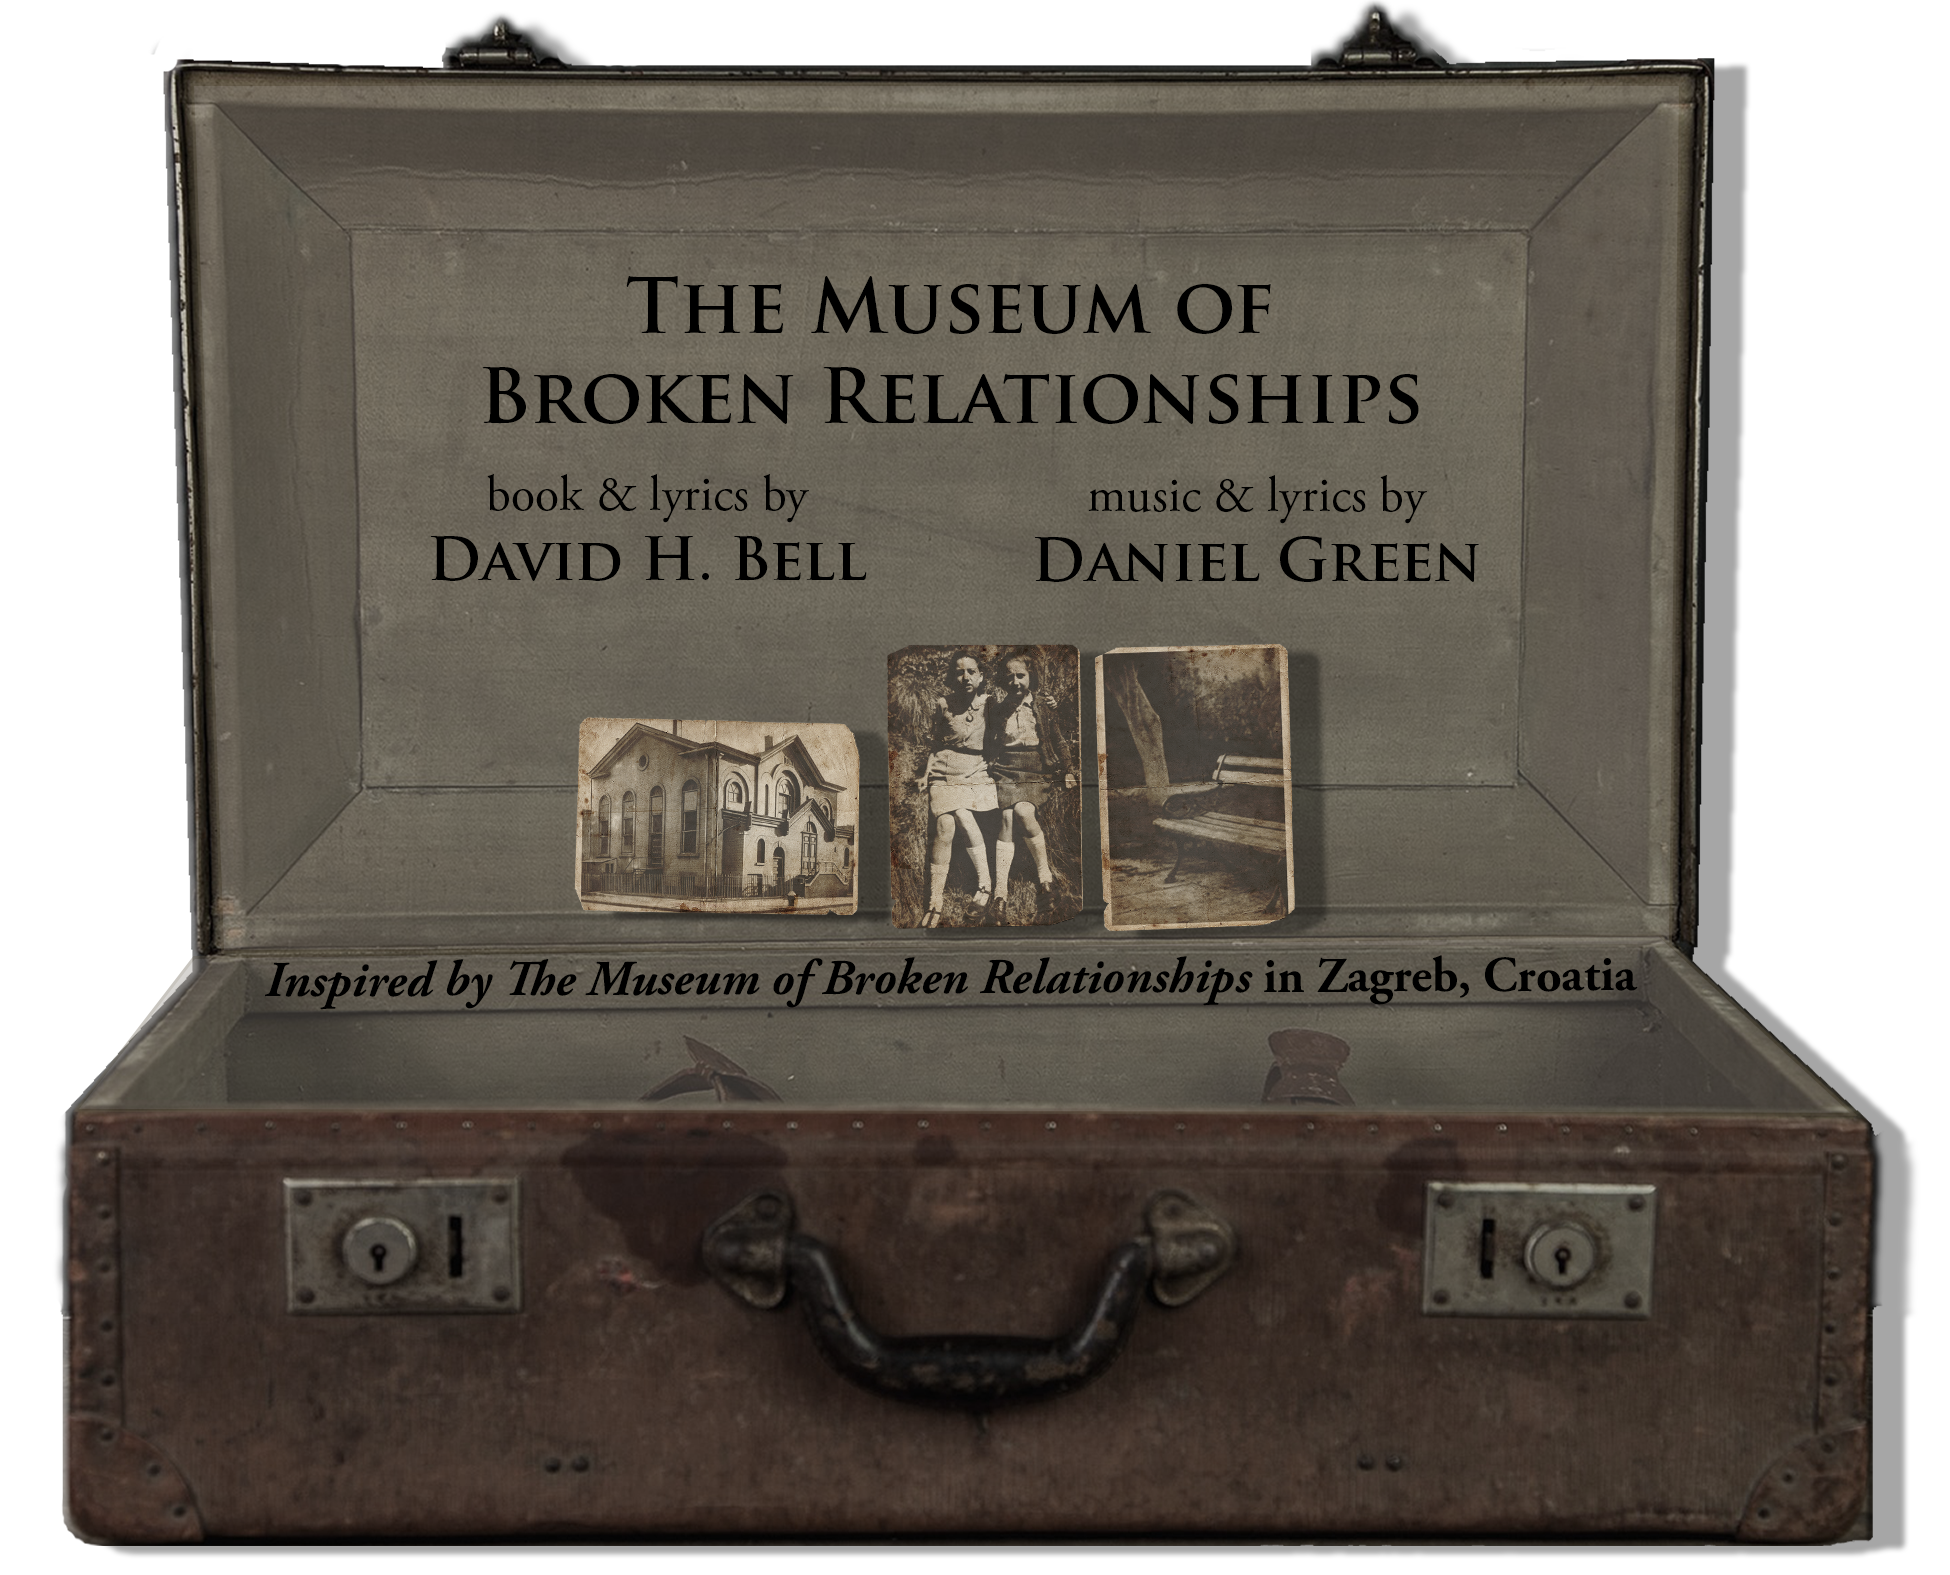 The Museum of Broken Relationships - book & lyrics by David H. Bell - music & lyrics by Daniel Green [Inspired by the museum in Zagreb, Croatia]